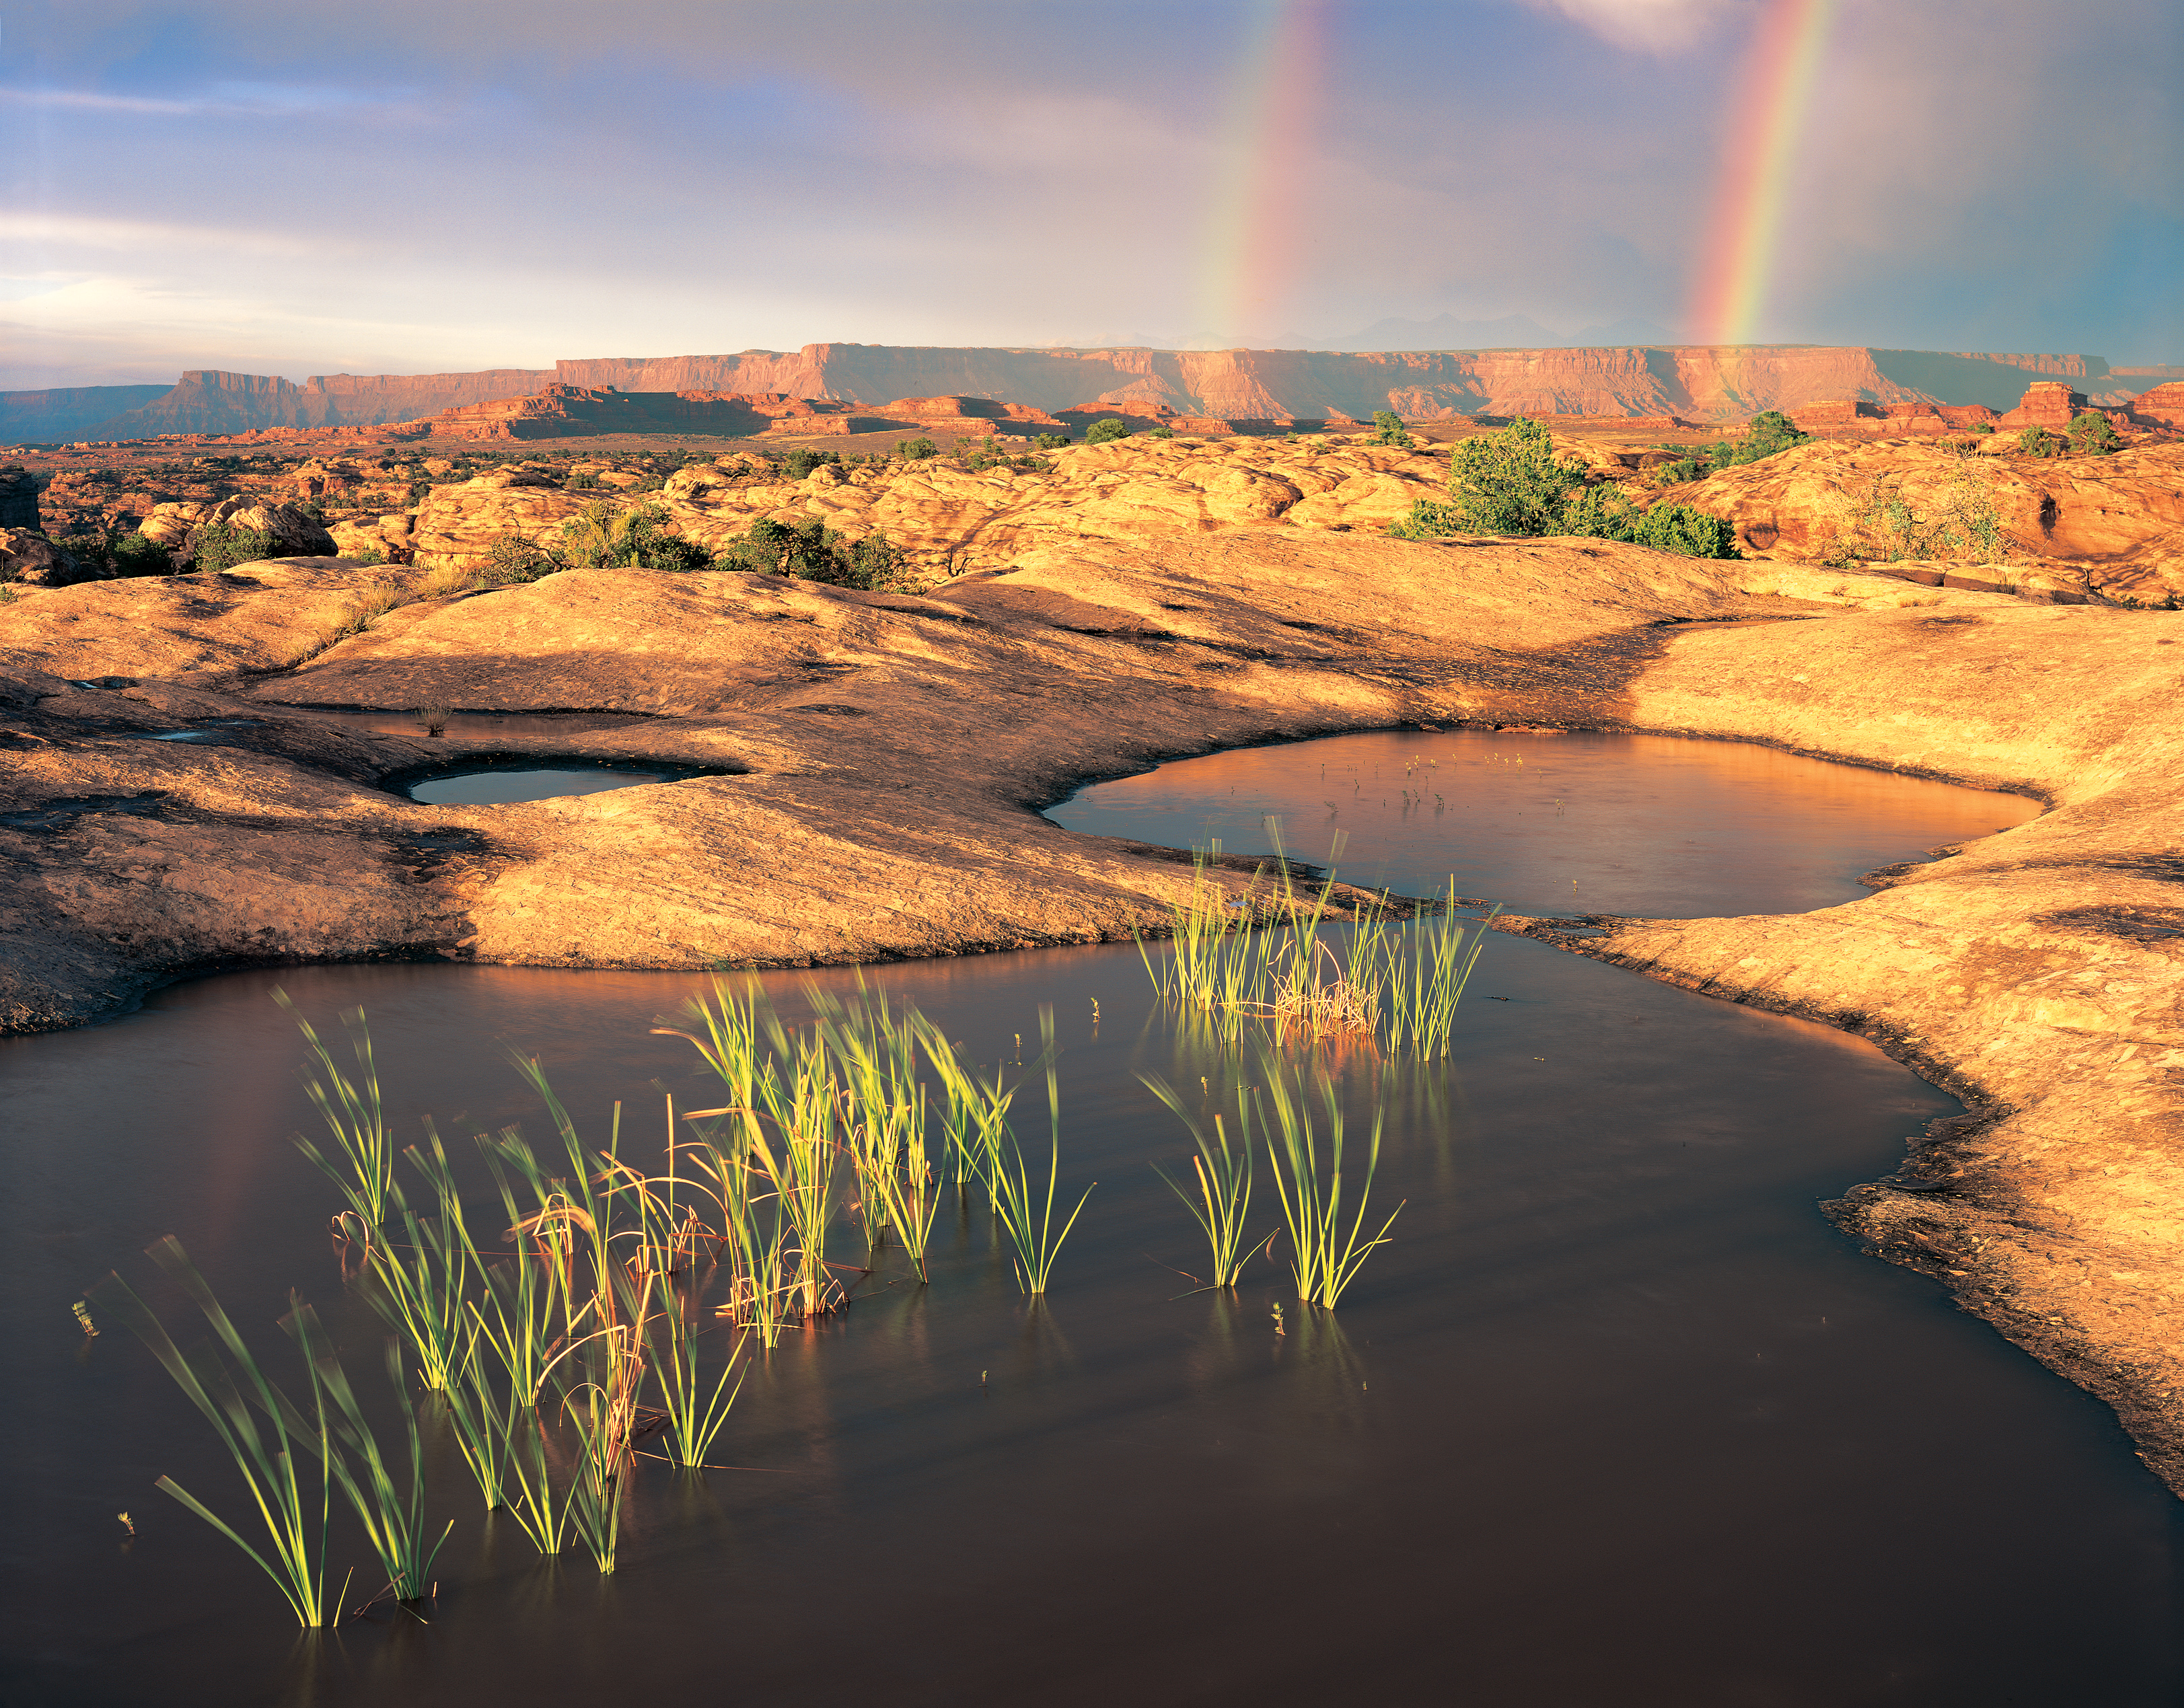 shallow pools with a double rainbow in the background